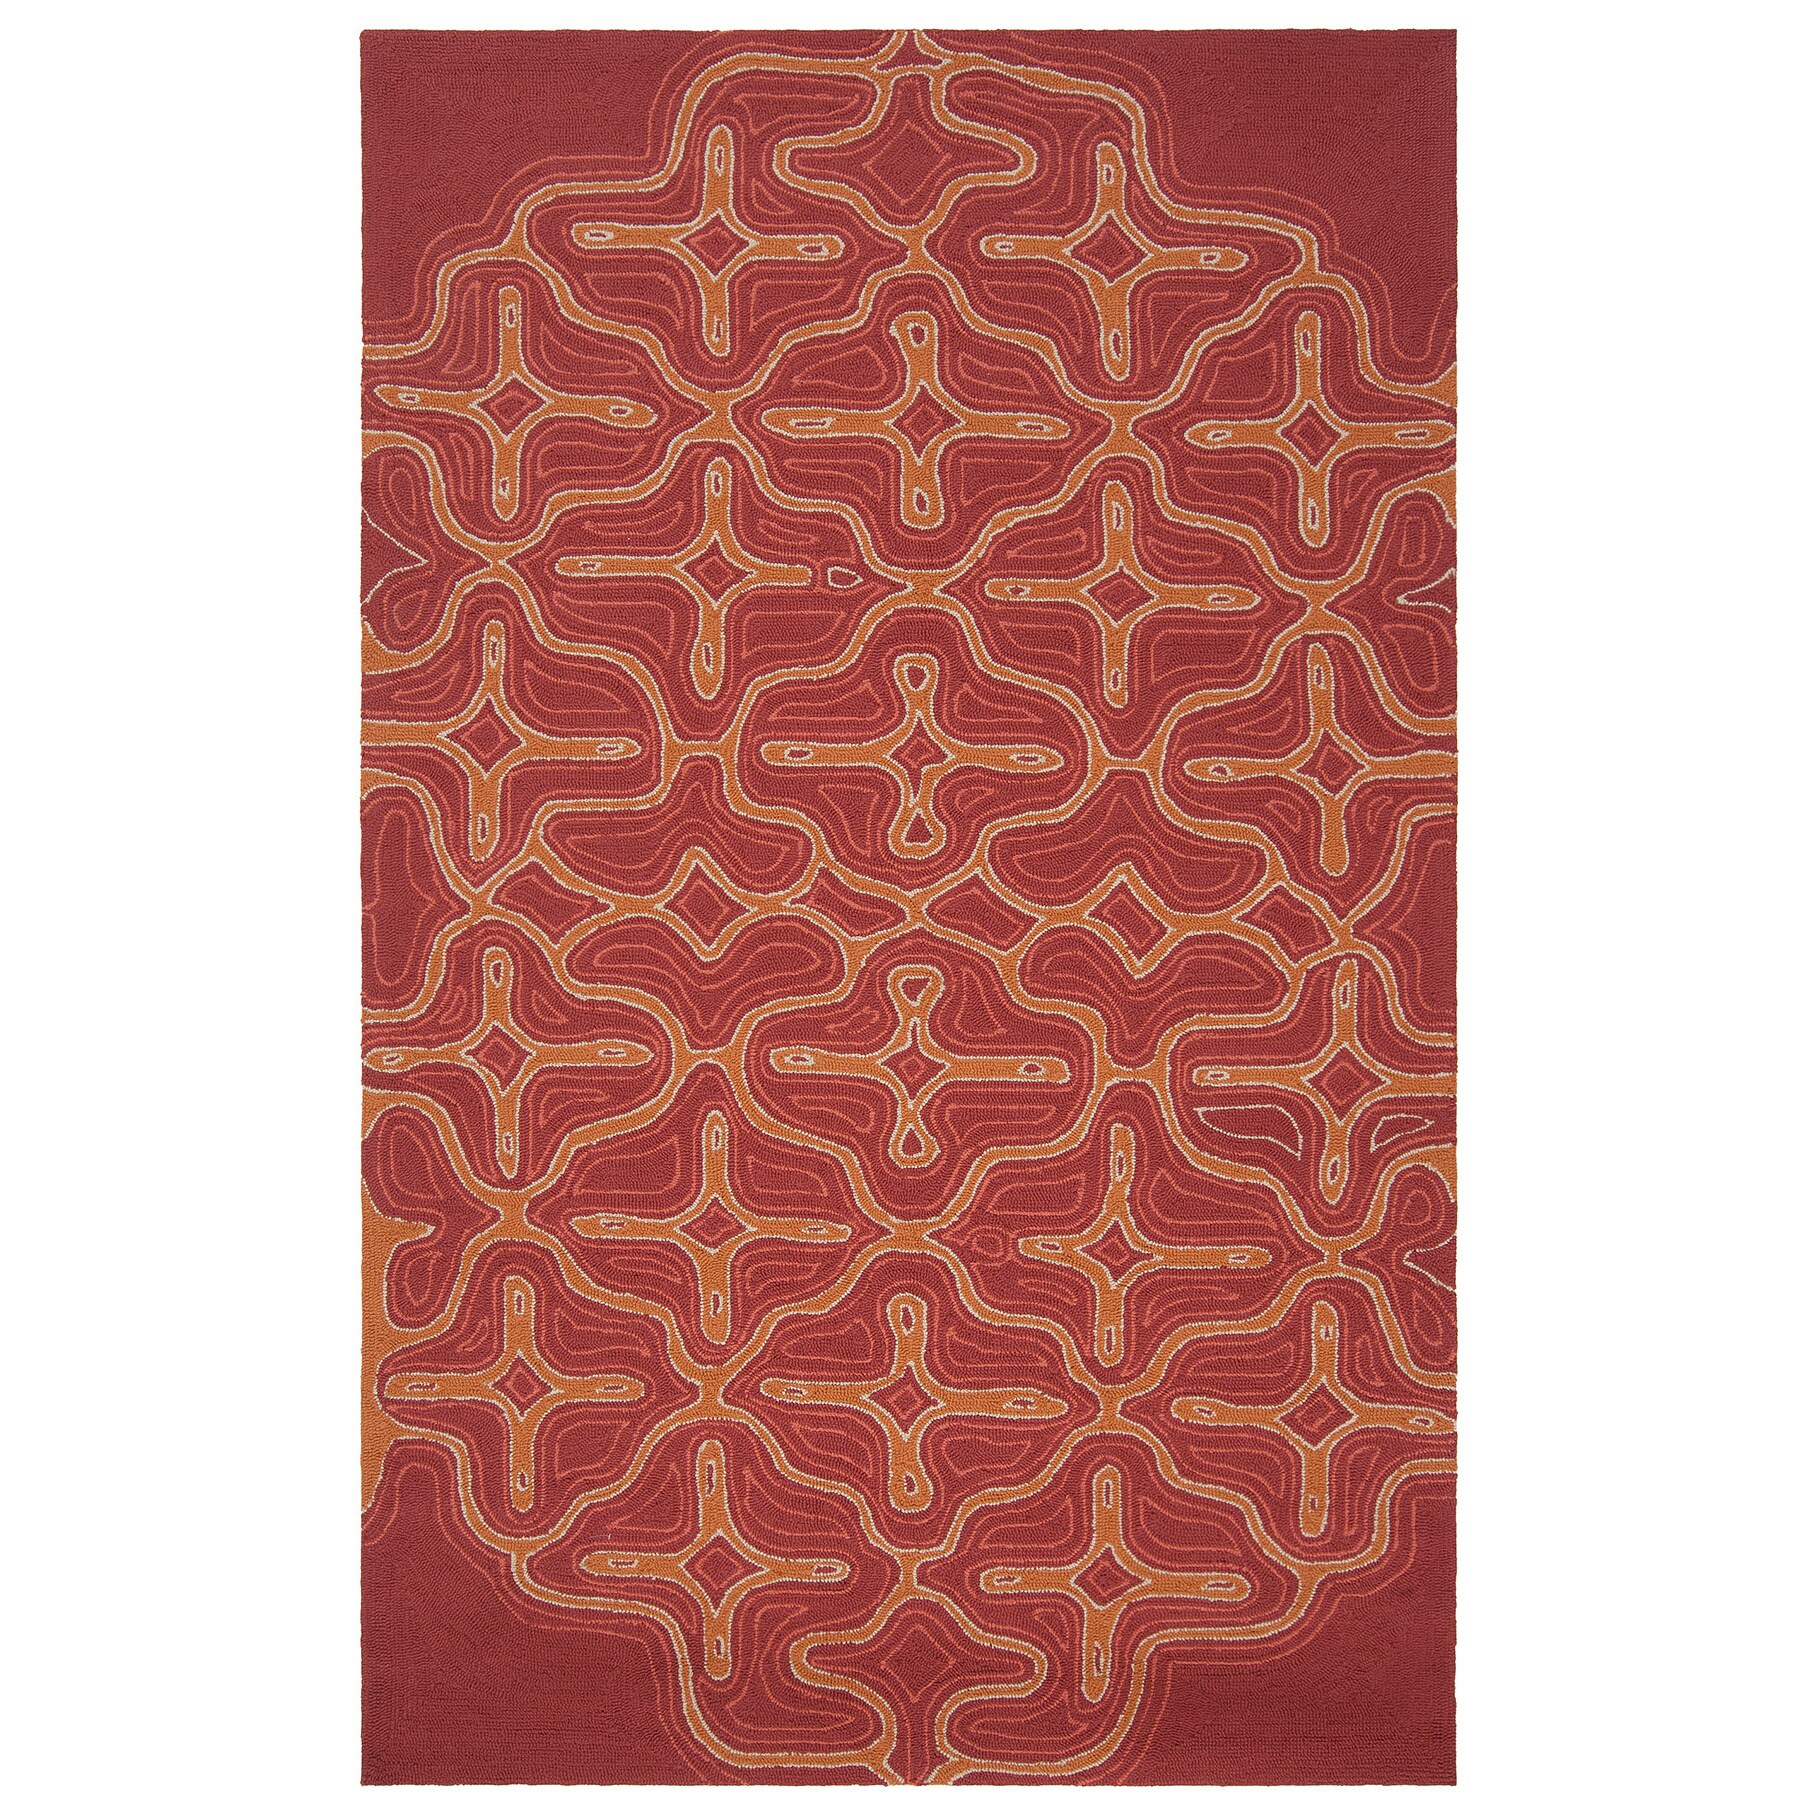 Hand hooked Maggie Transitional Abstract Indoor/ Outdoor Area Rug (2 X 3)